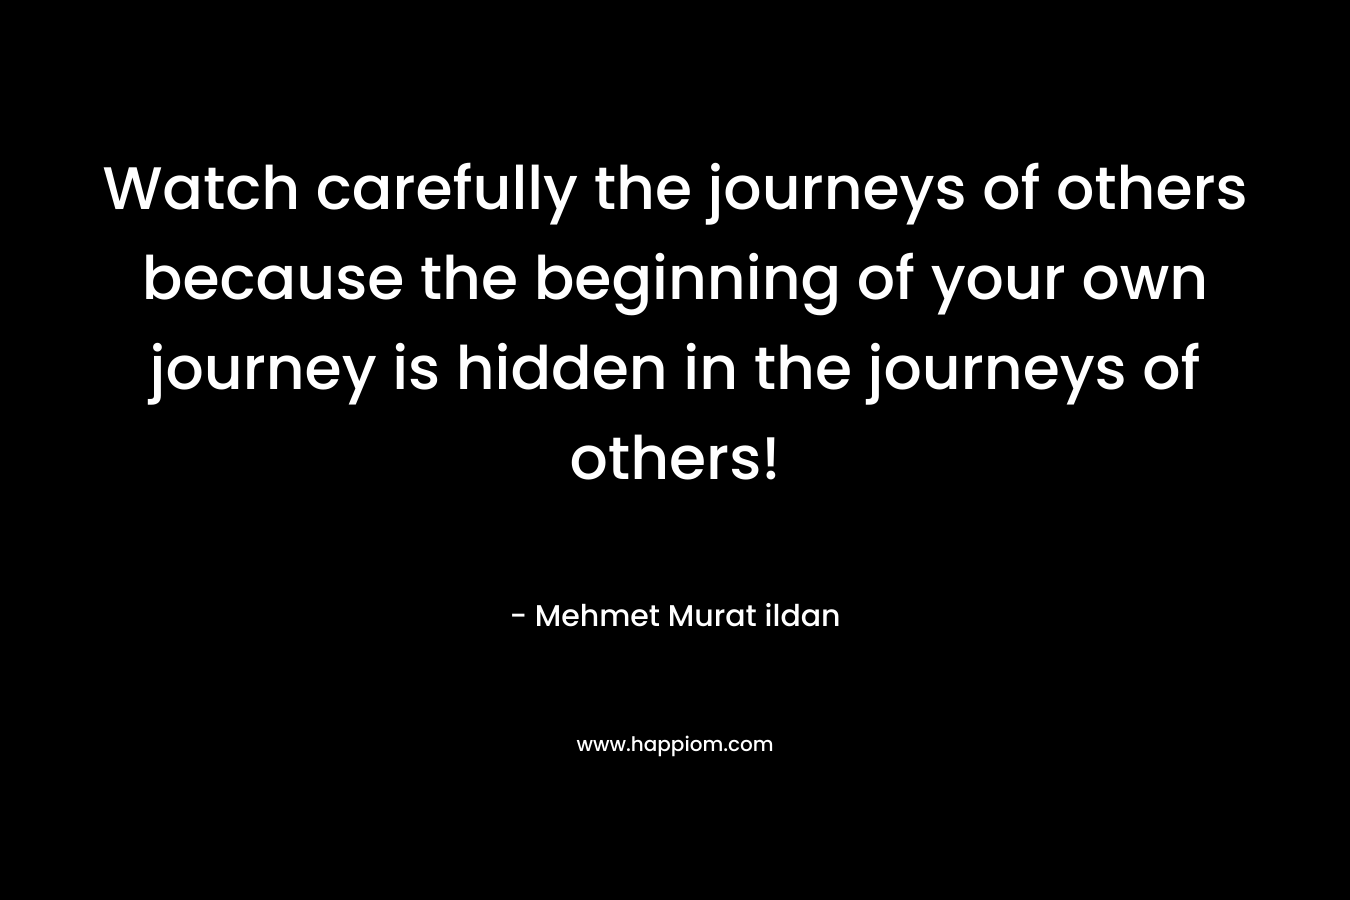 Watch carefully the journeys of others because the beginning of your own journey is hidden in the journeys of others!